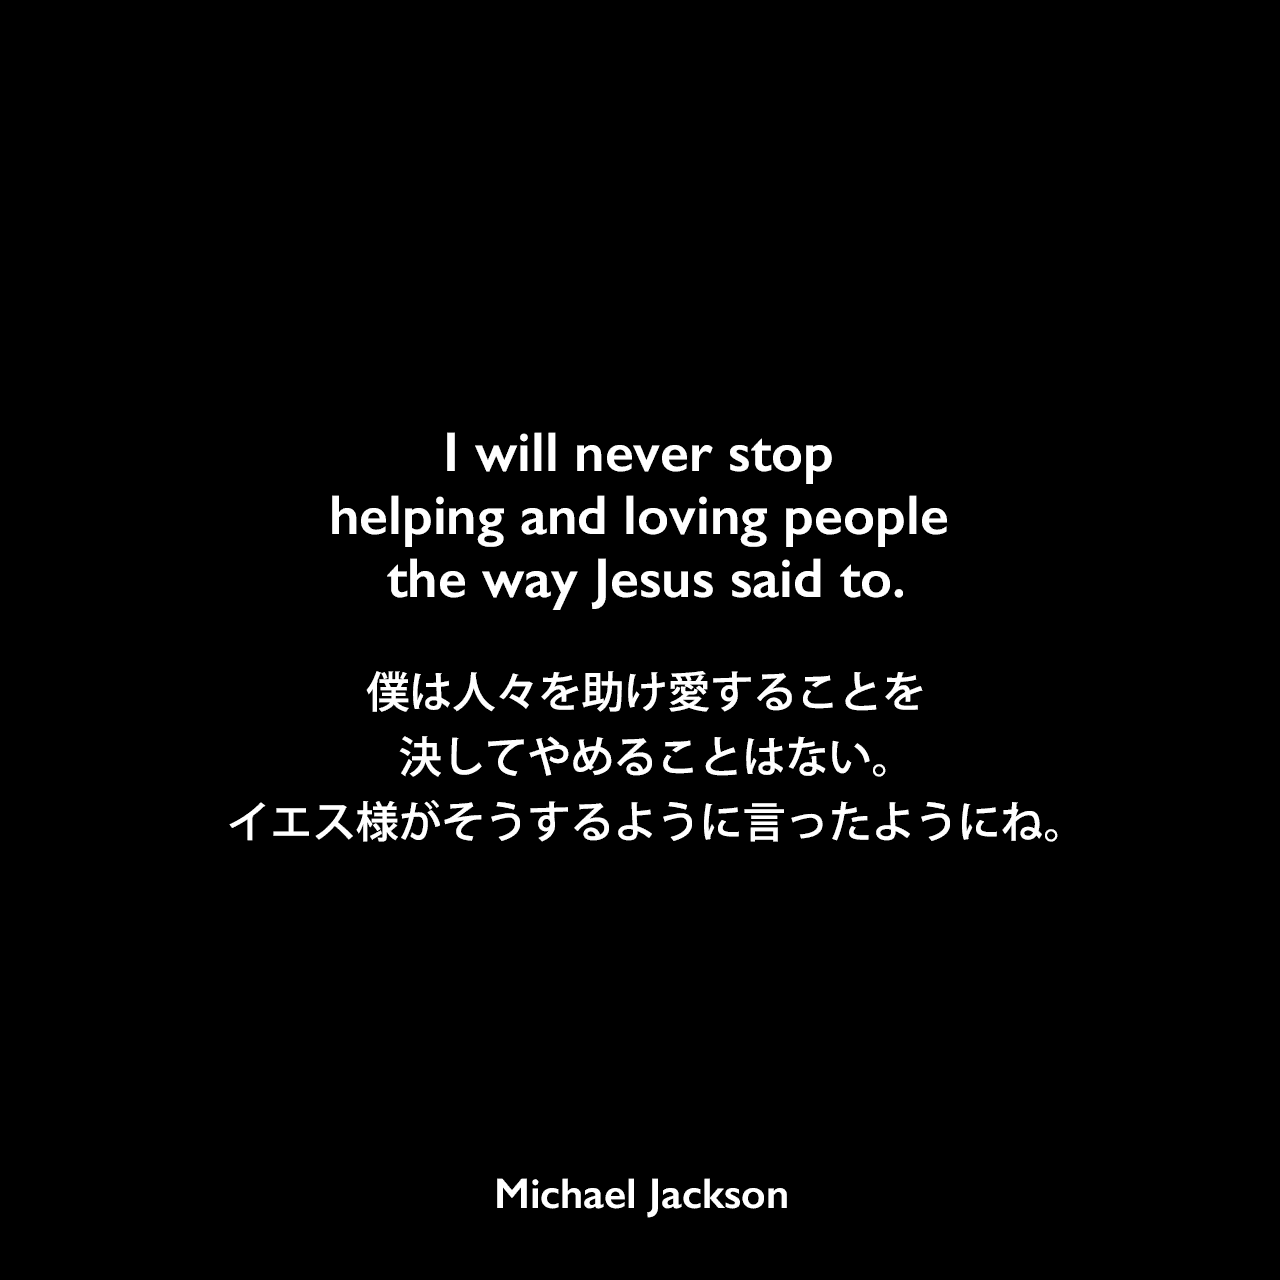 I will never stop helping and loving people the way Jesus said to.僕は人々を助け愛することを決してやめることはない。イエス様がそうするように言ったようにね。Michael Jackson